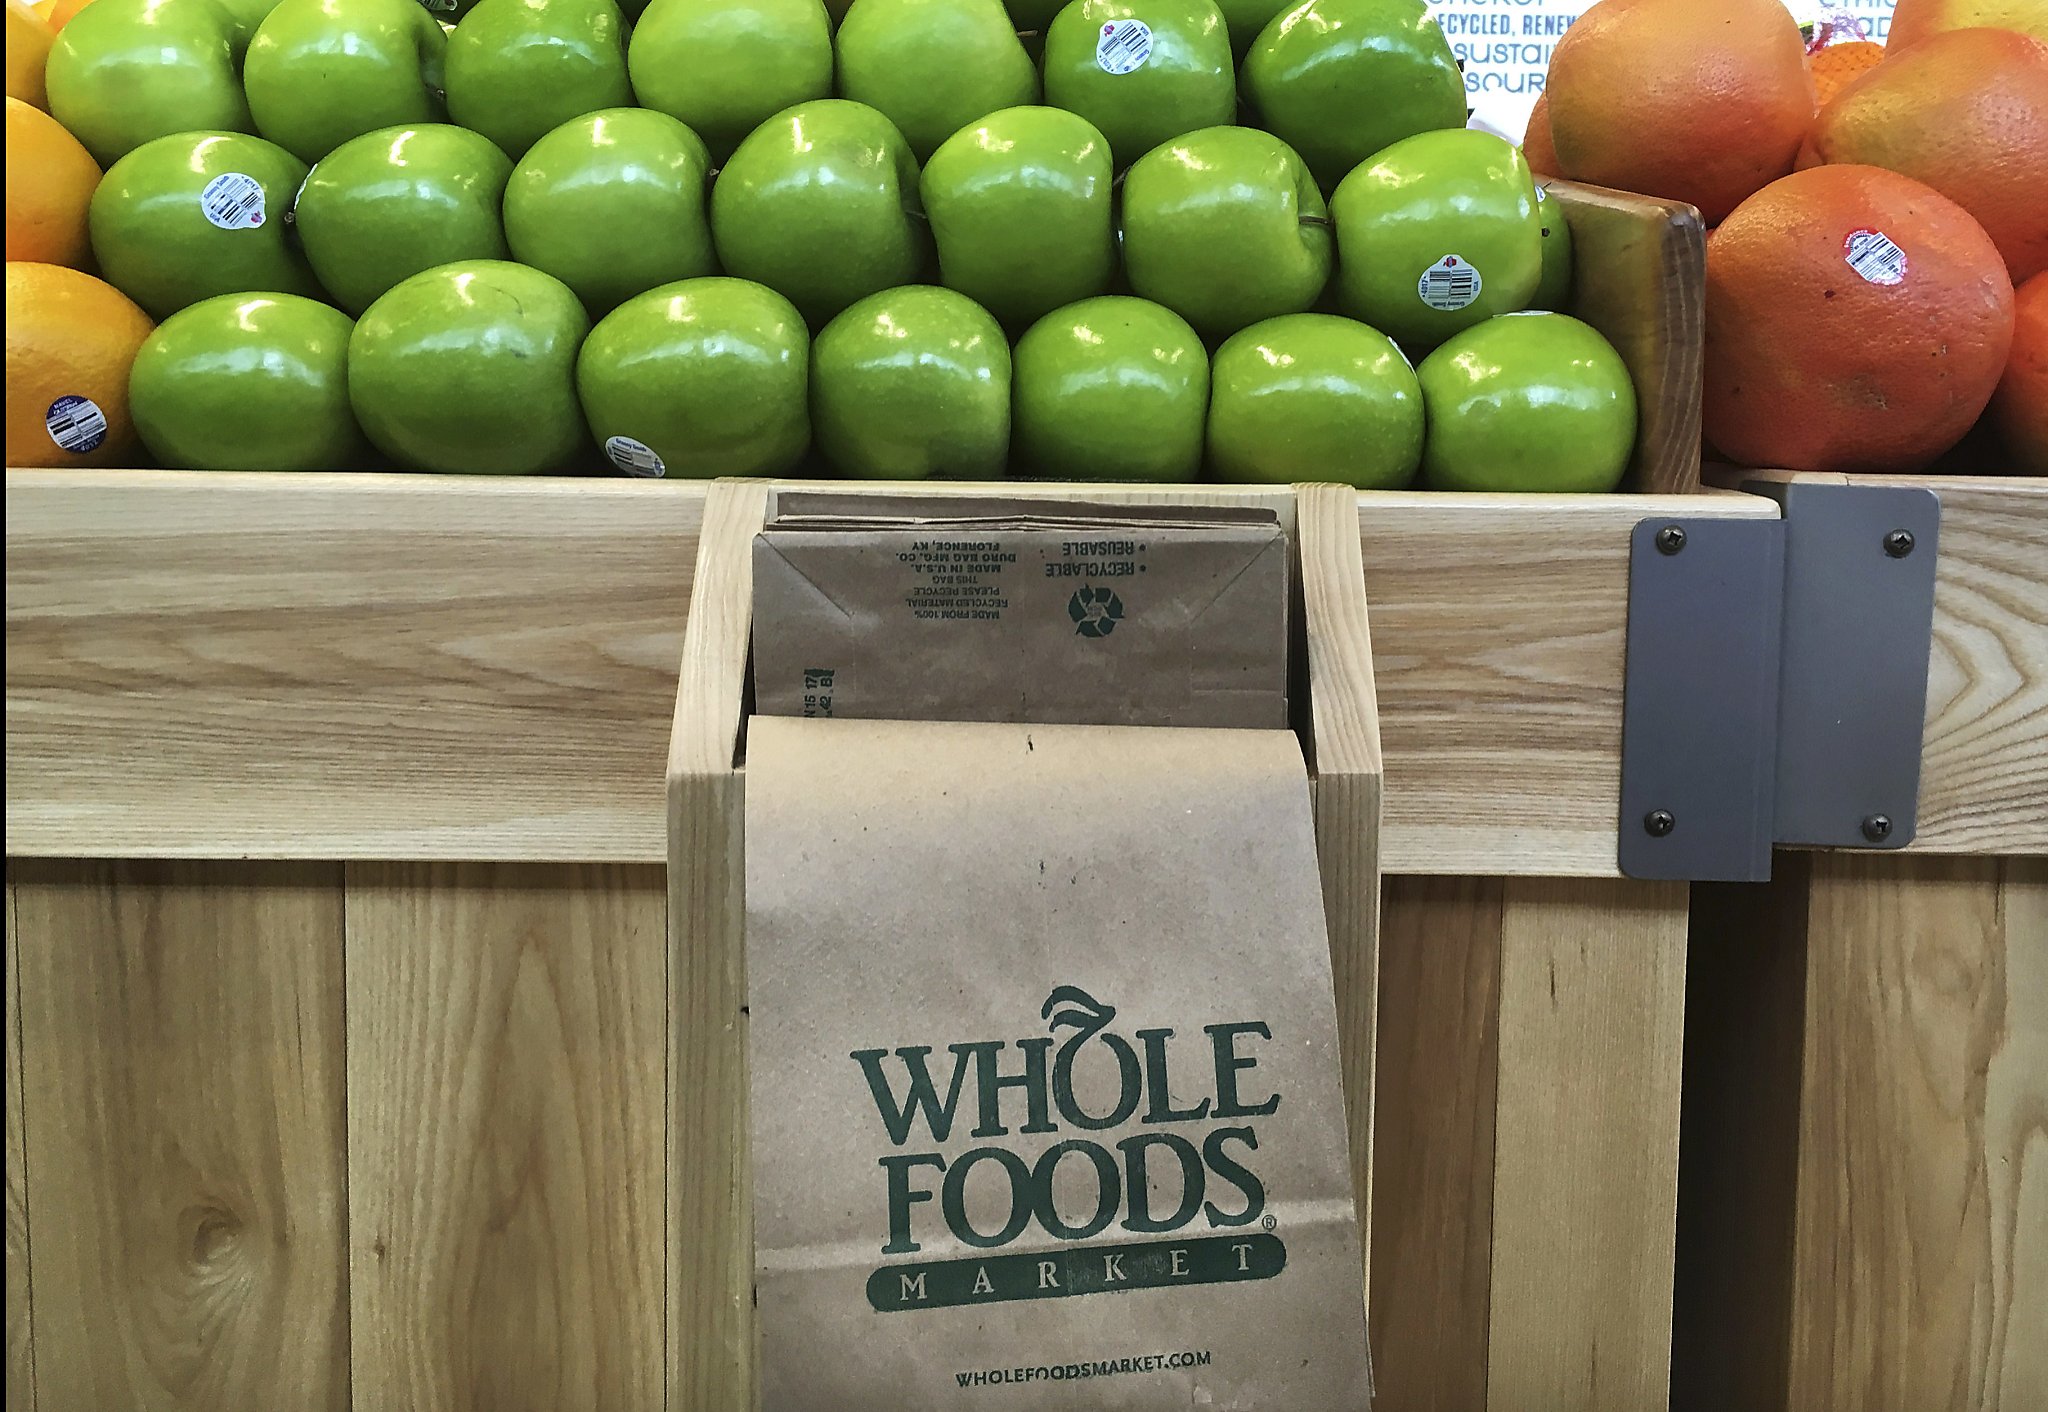 Are these new delivery bags recyclable? : r/wholefoods